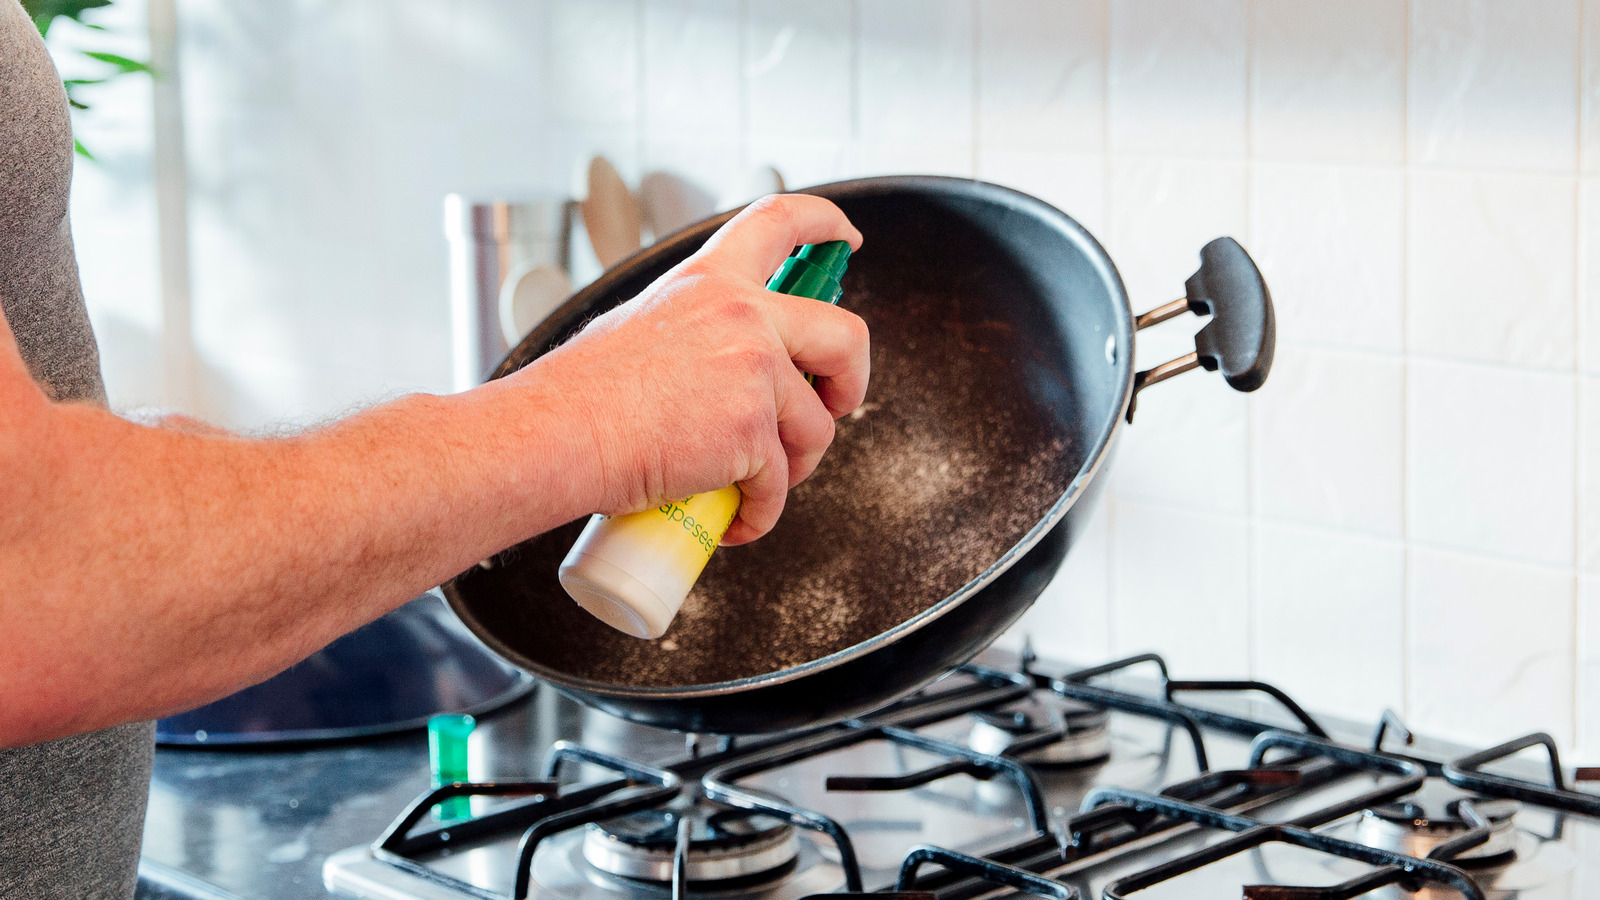 Why Should You Avoid Using Cooking Spray on Nonstick Pans?